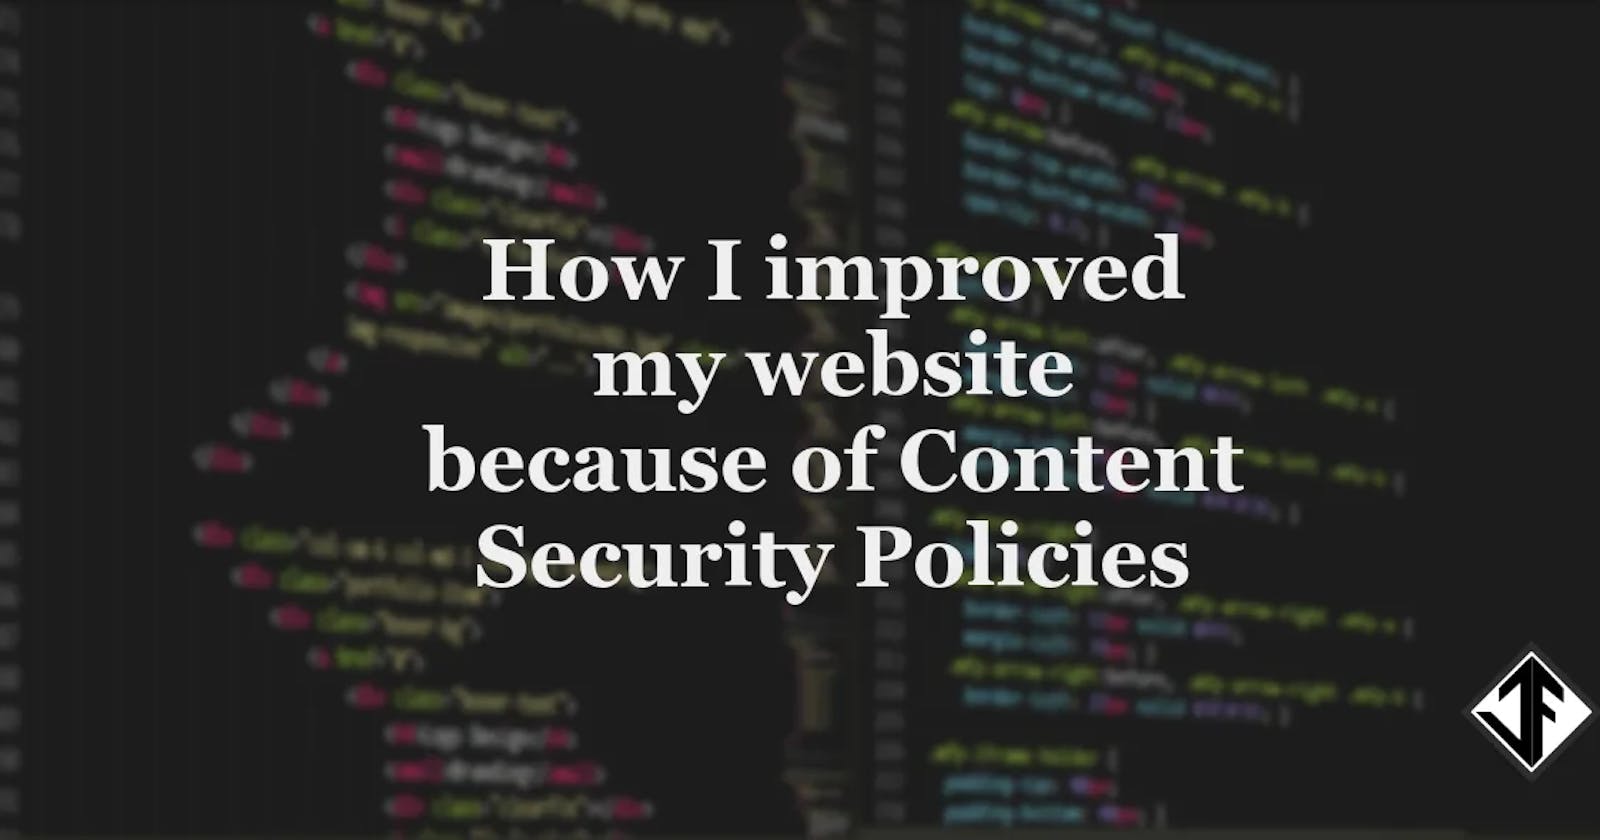 How I improved my website because of Content Security Policies